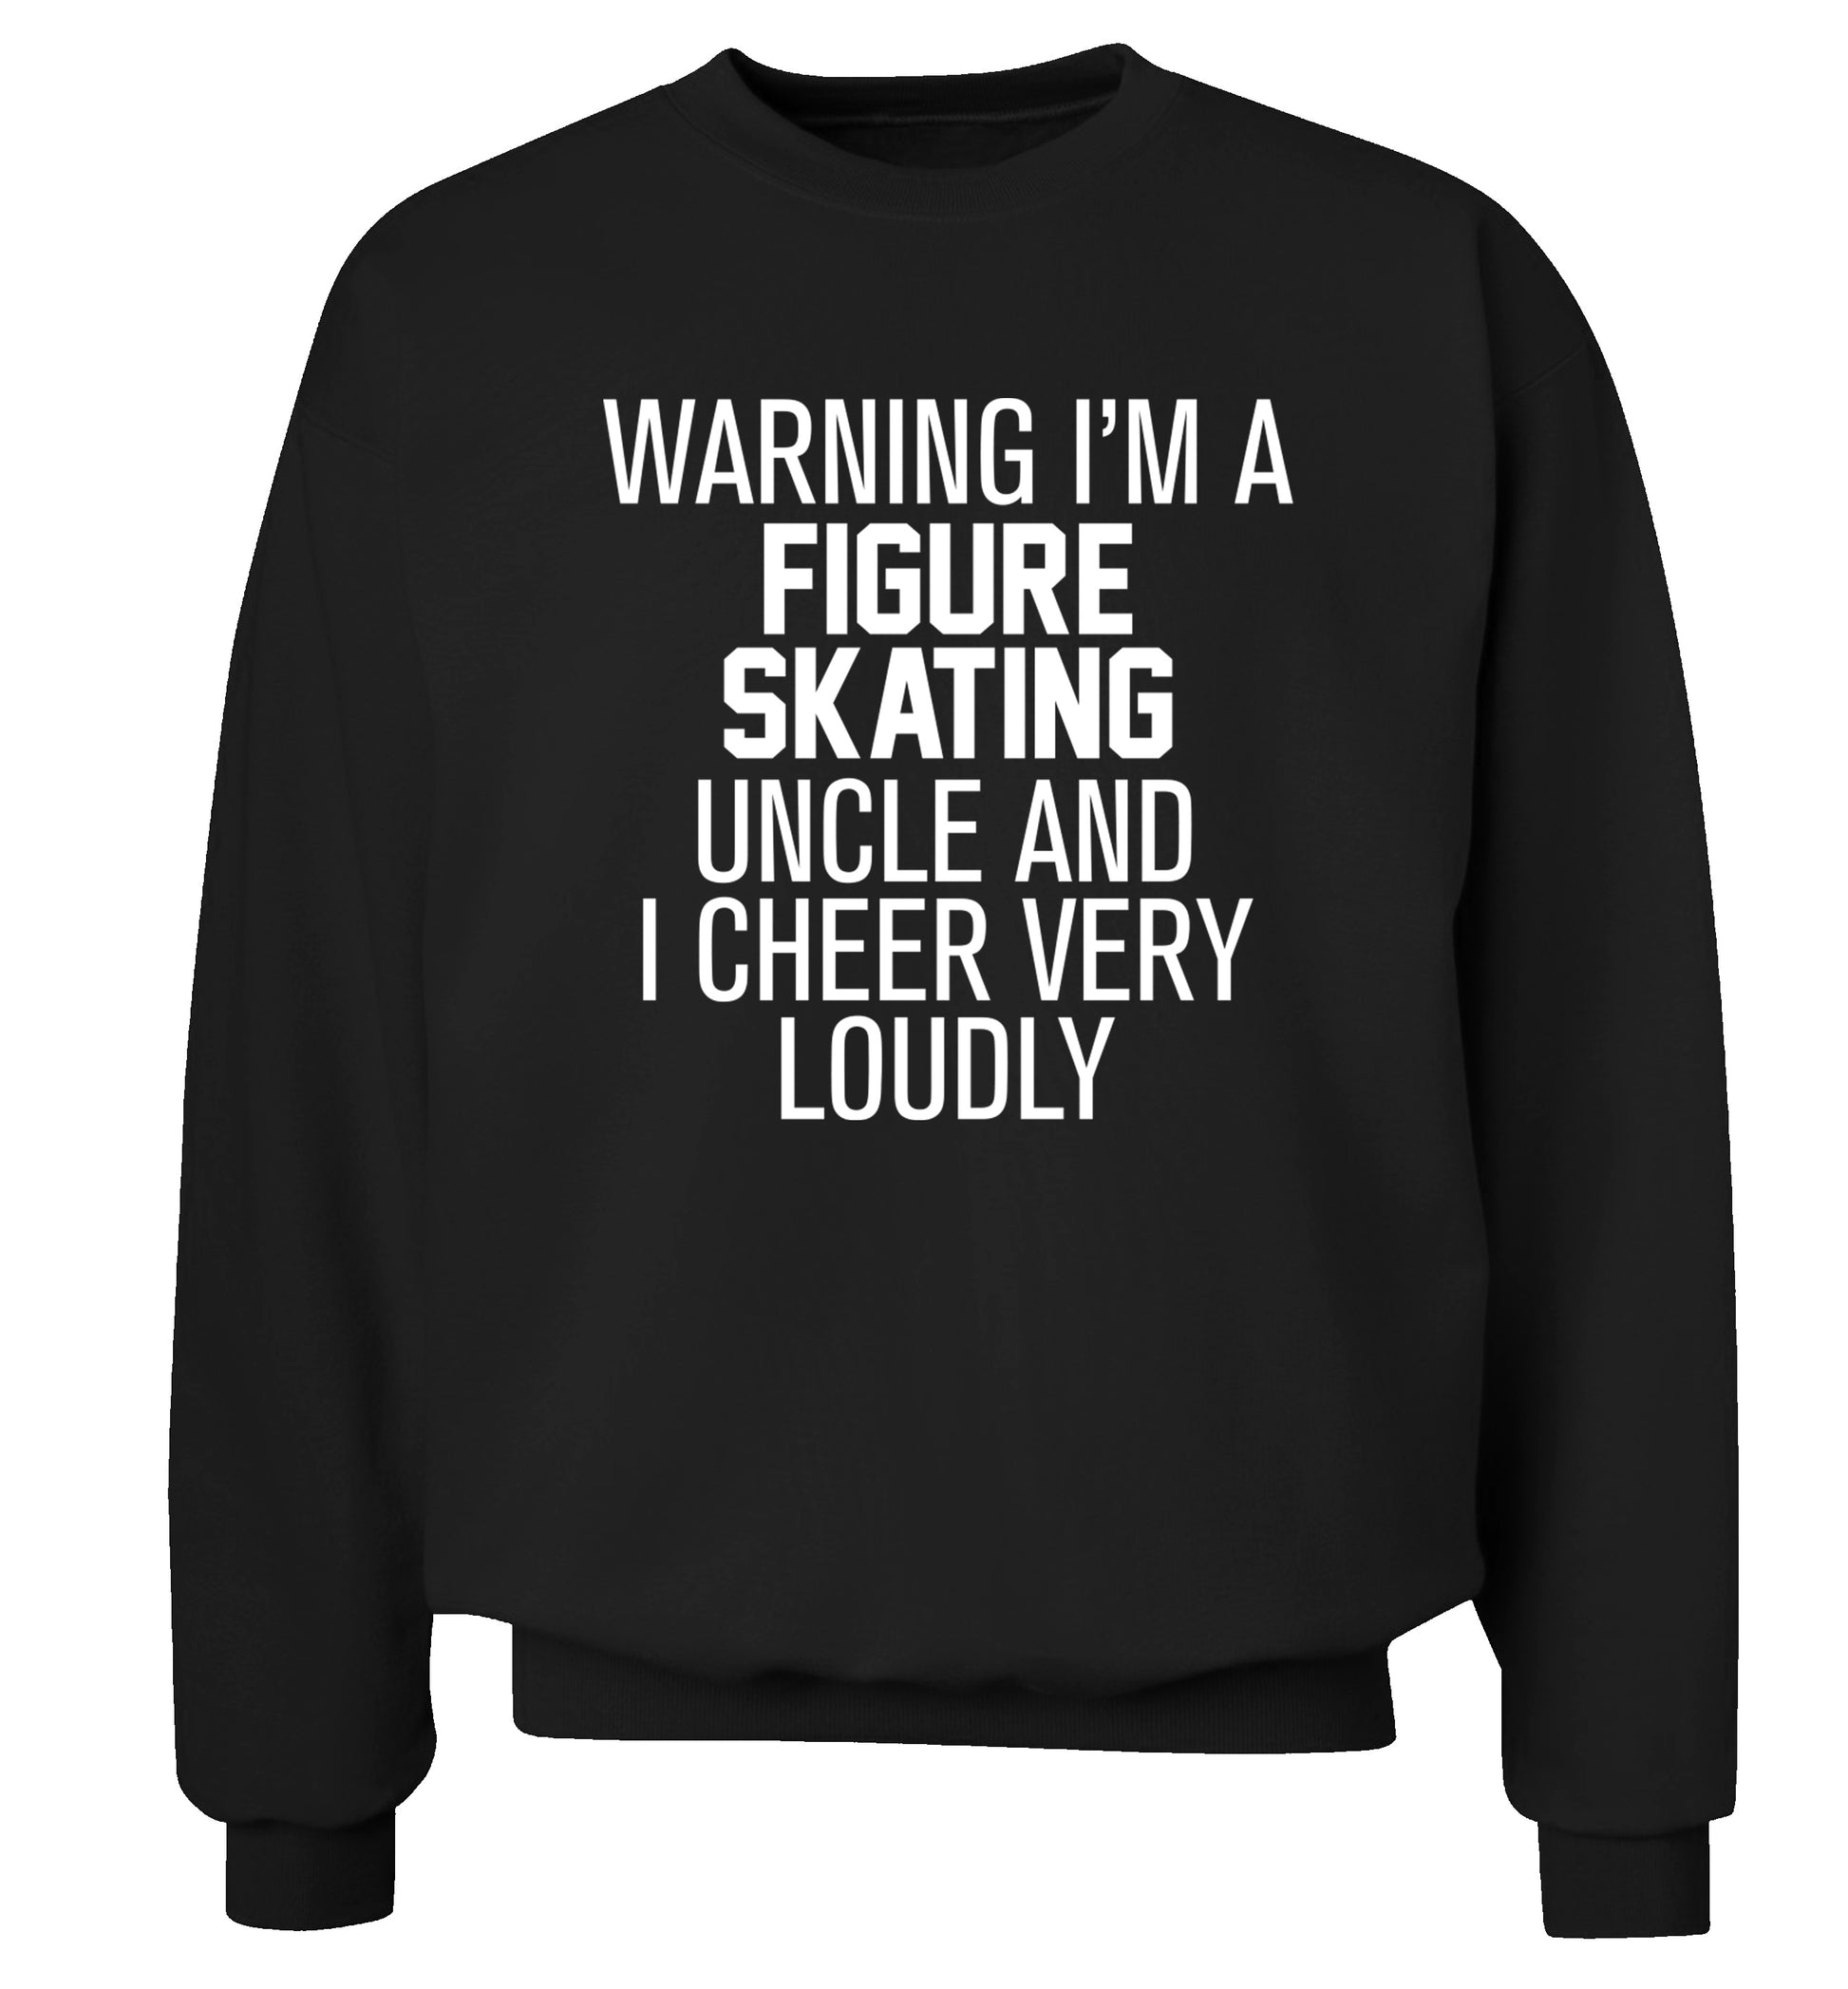 Warning I'm a figure skating uncle and I cheer very loudly Adult's unisexblack Sweater 2XL